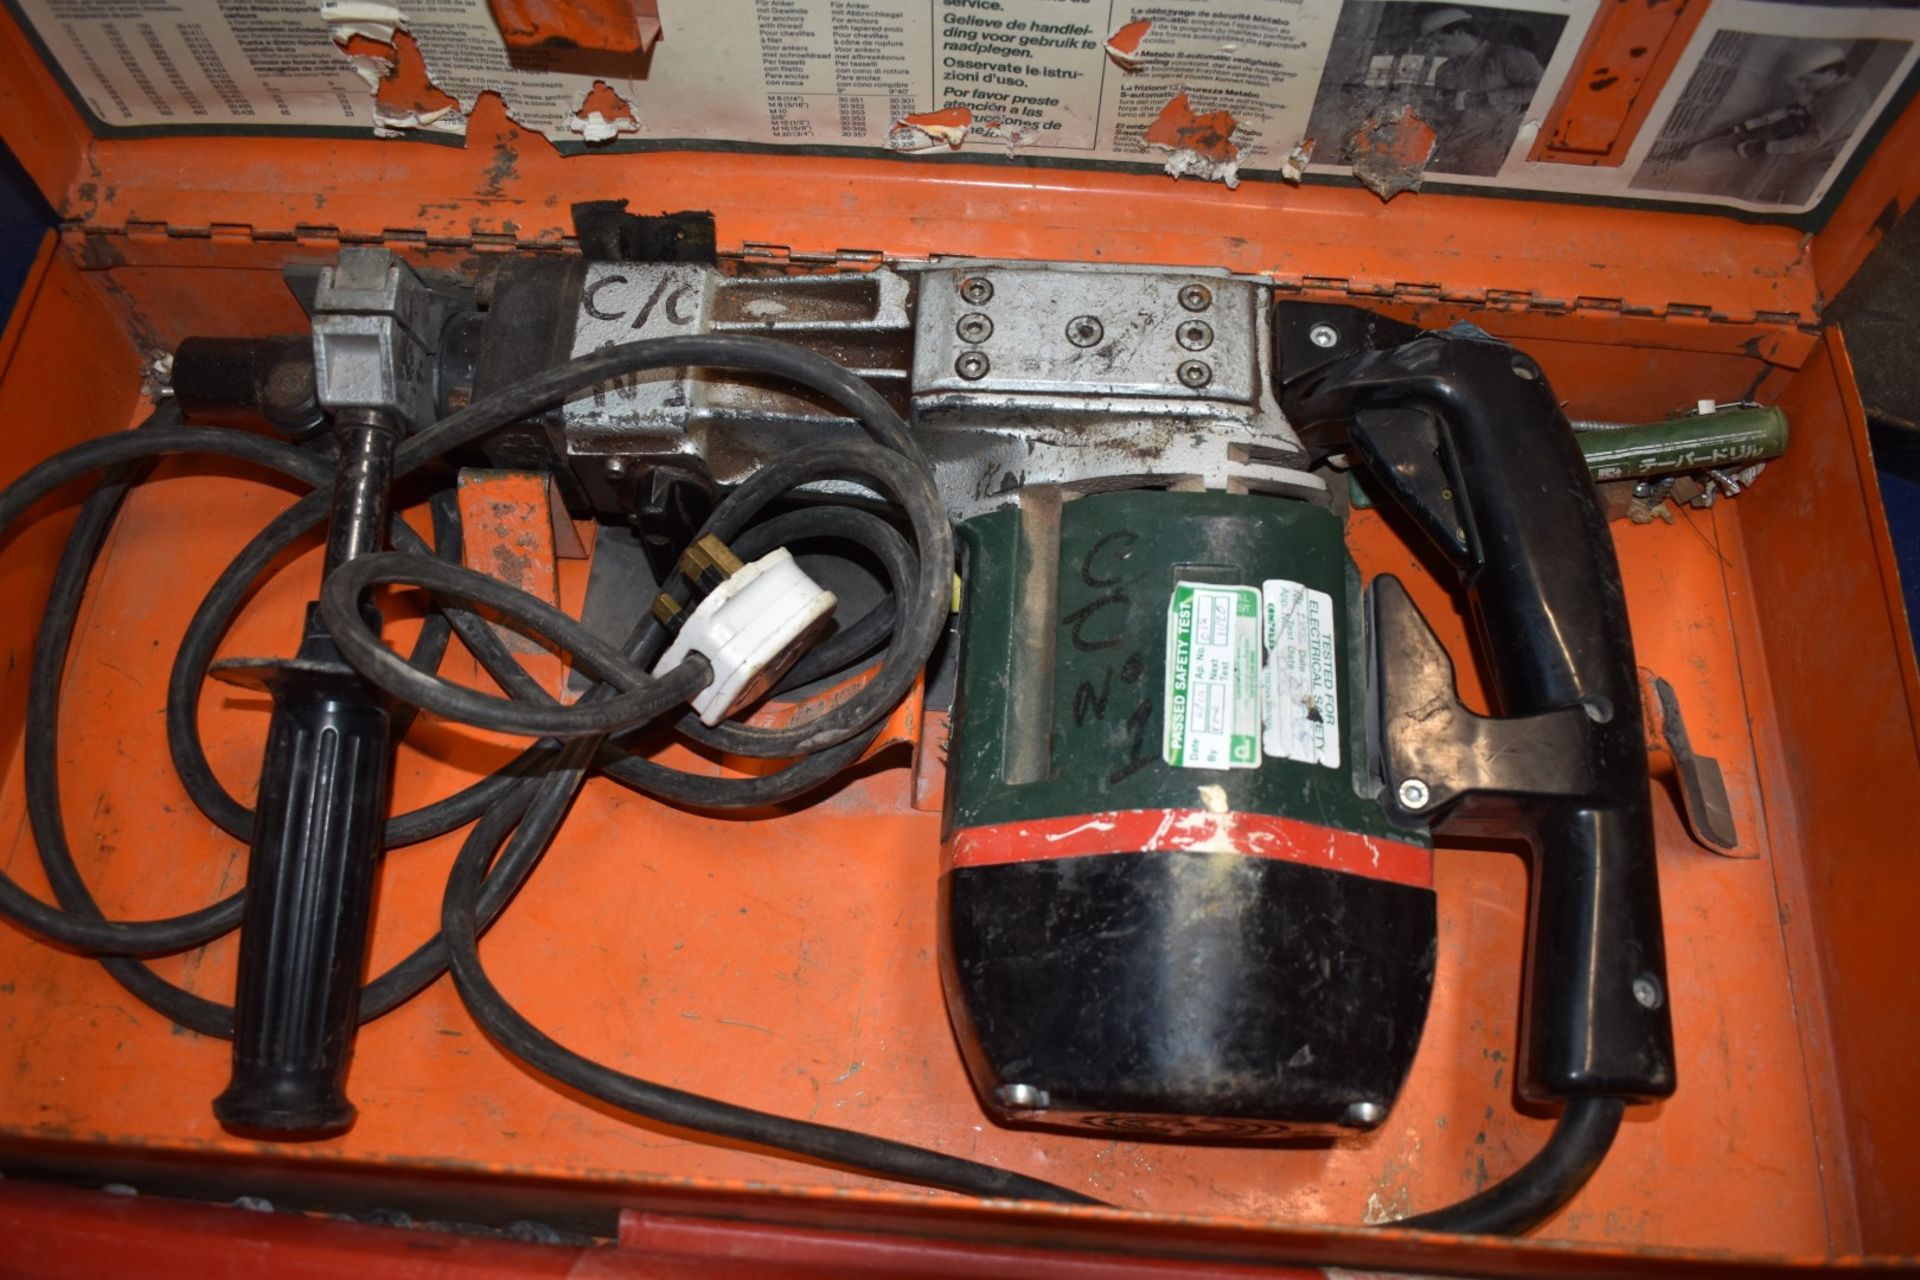 1 x Metabo Bohrhammer BH 1131 S Automatic 240v Hammer Drill With Selection of Various Drill Bits - Image 3 of 8